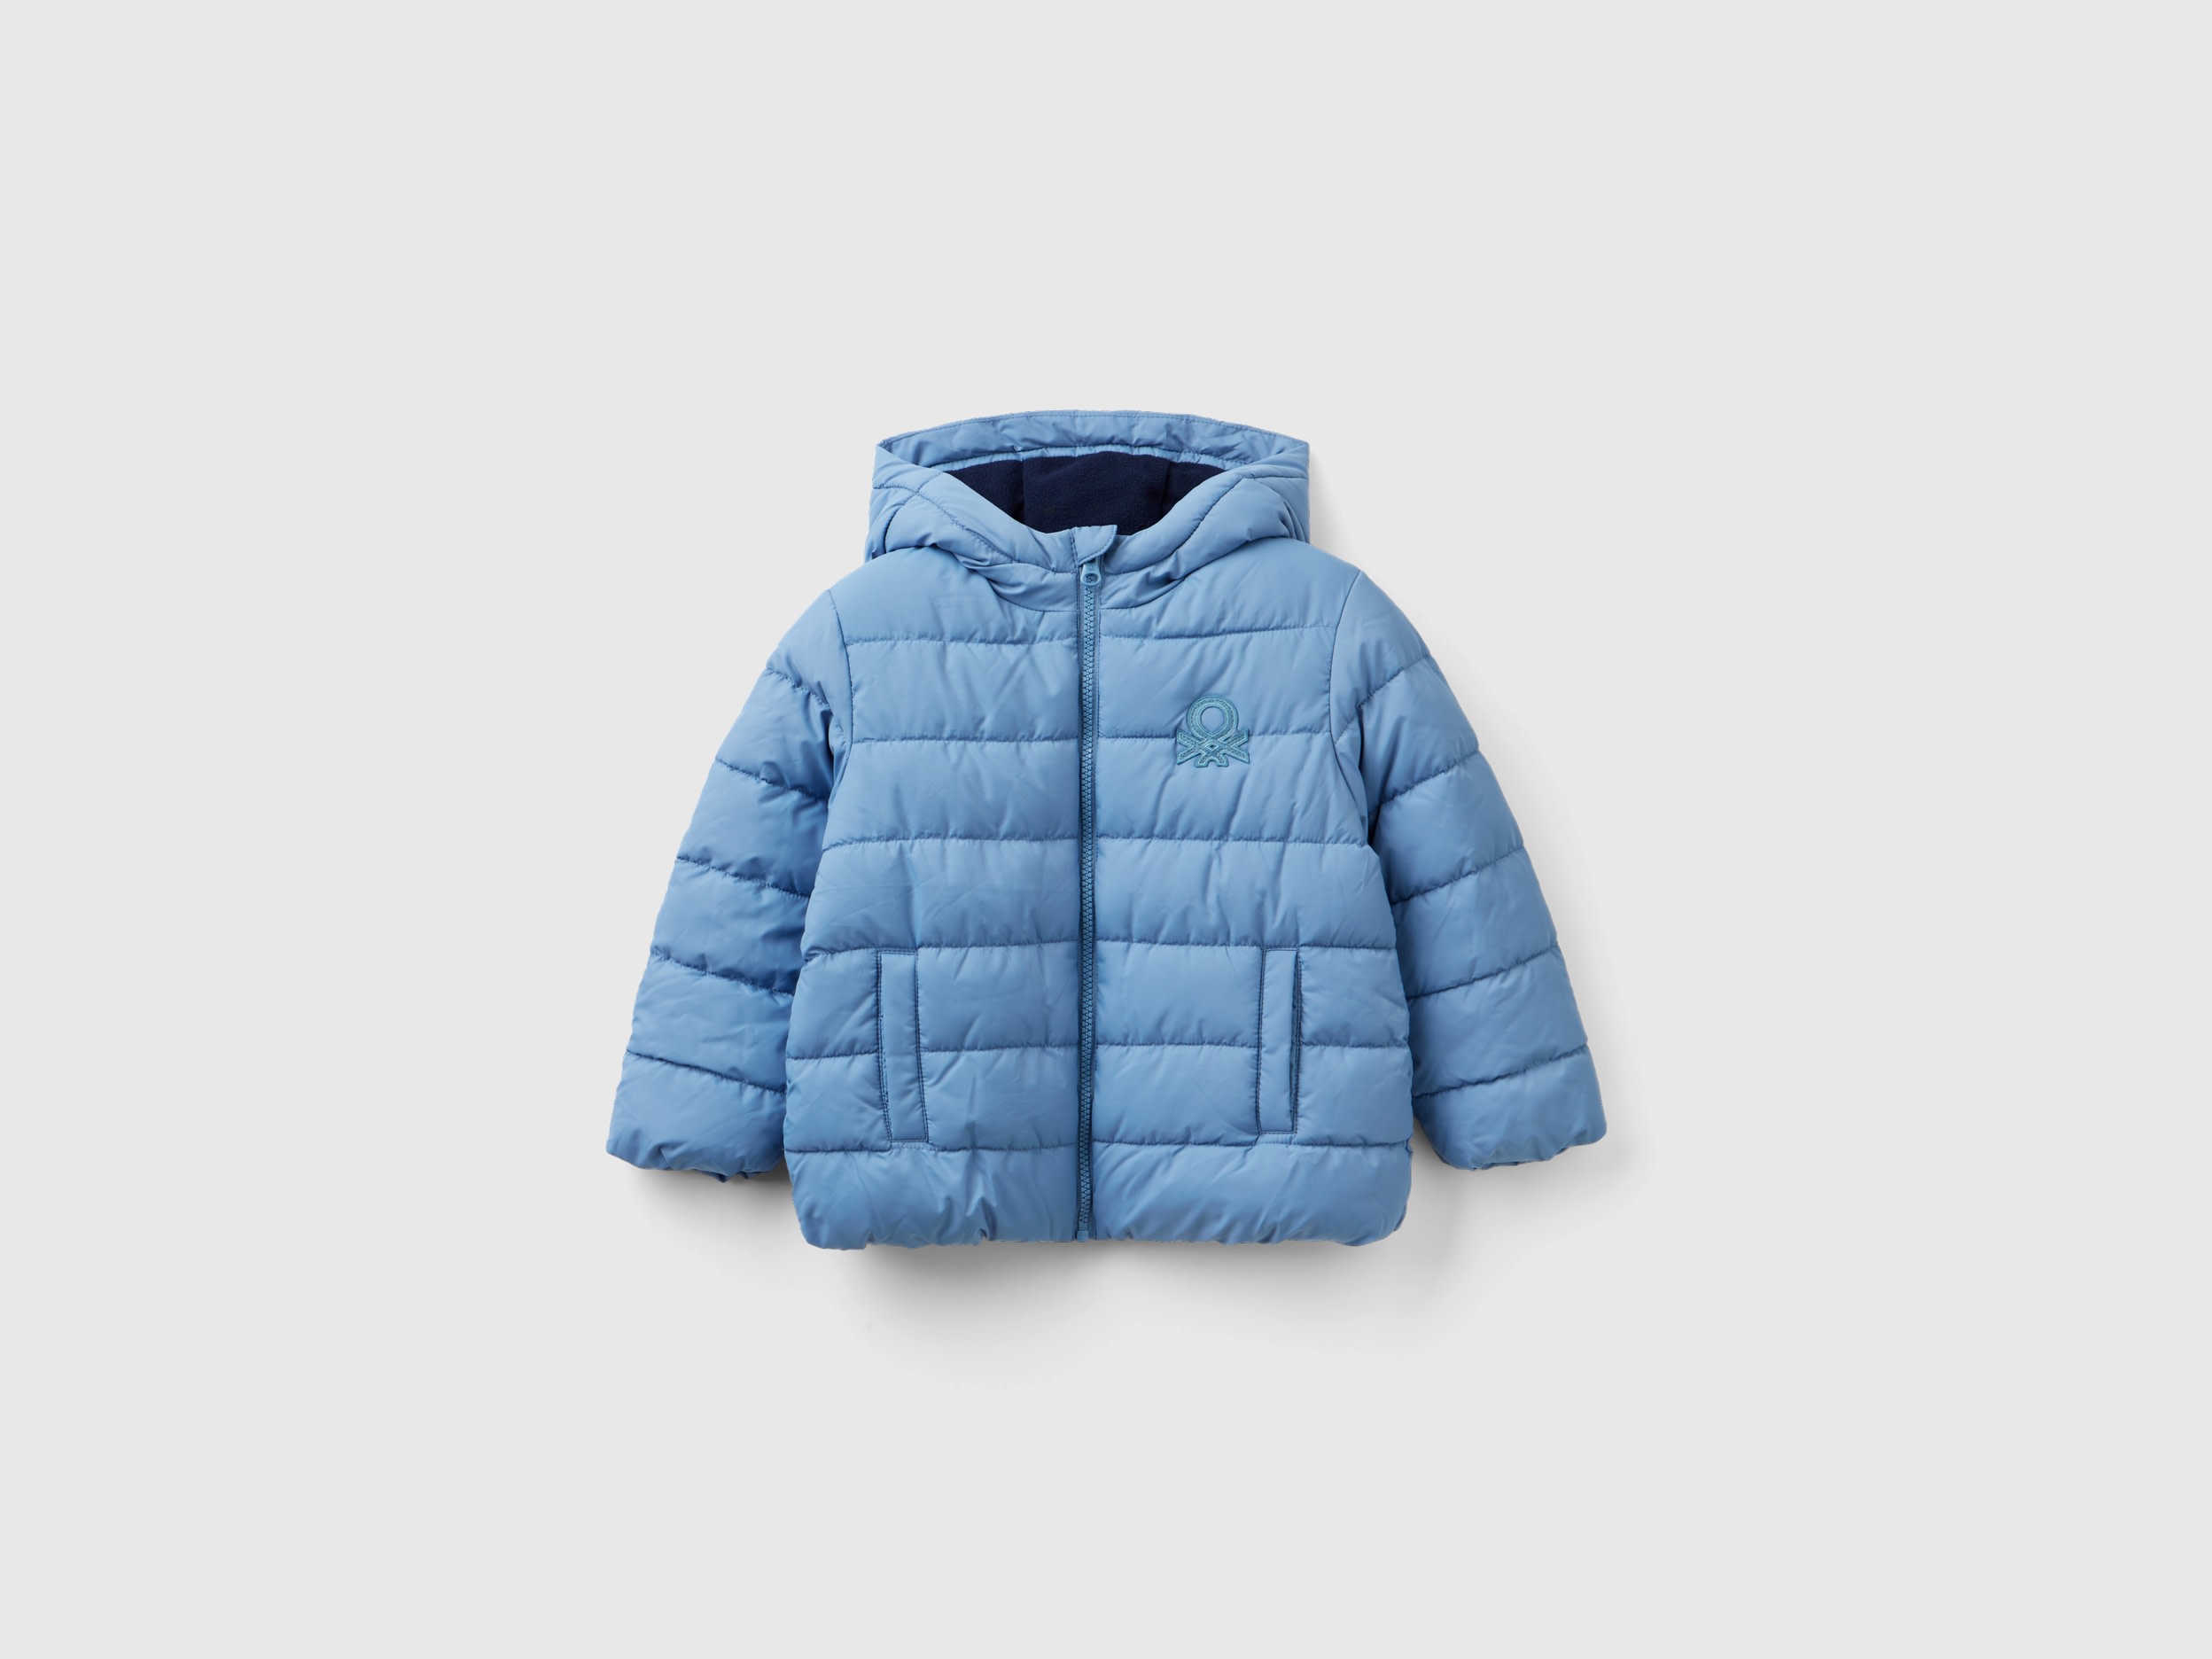 Benetton, Puffer Jacket With Hood And Logo, size 4-5, Light Blue, Kids